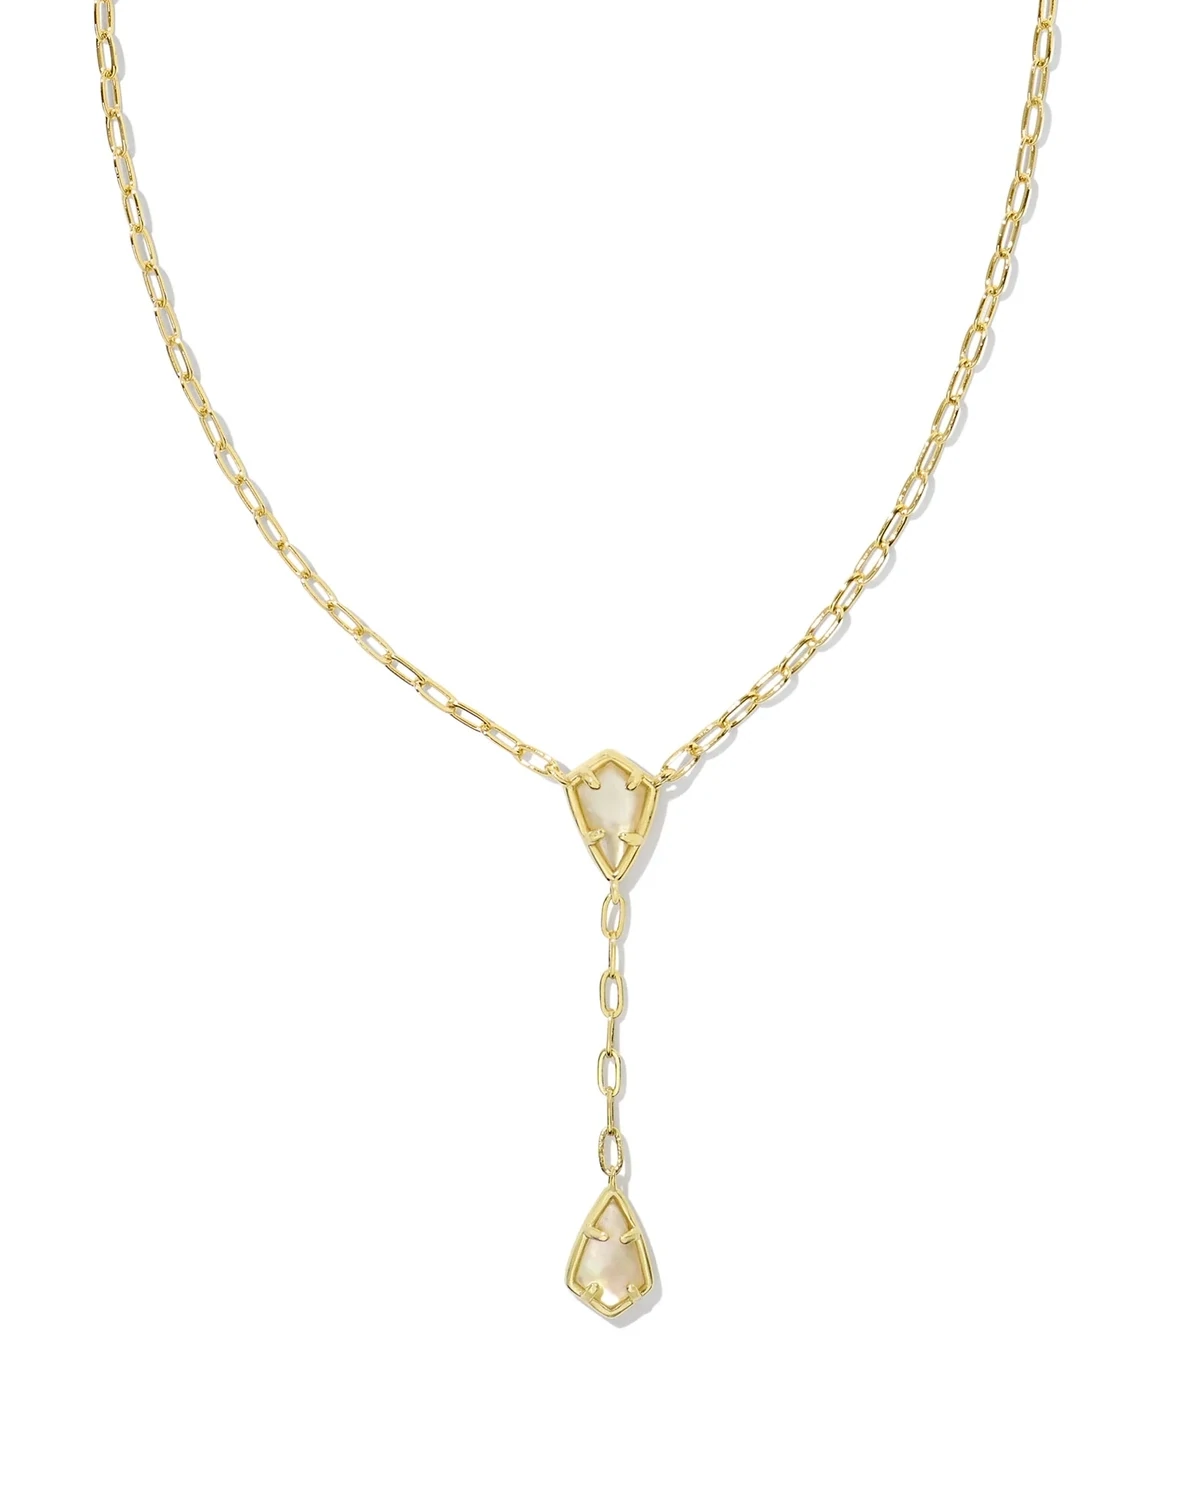 Kendra Scott Camry Y Necklace, Gold/Golden Abalone